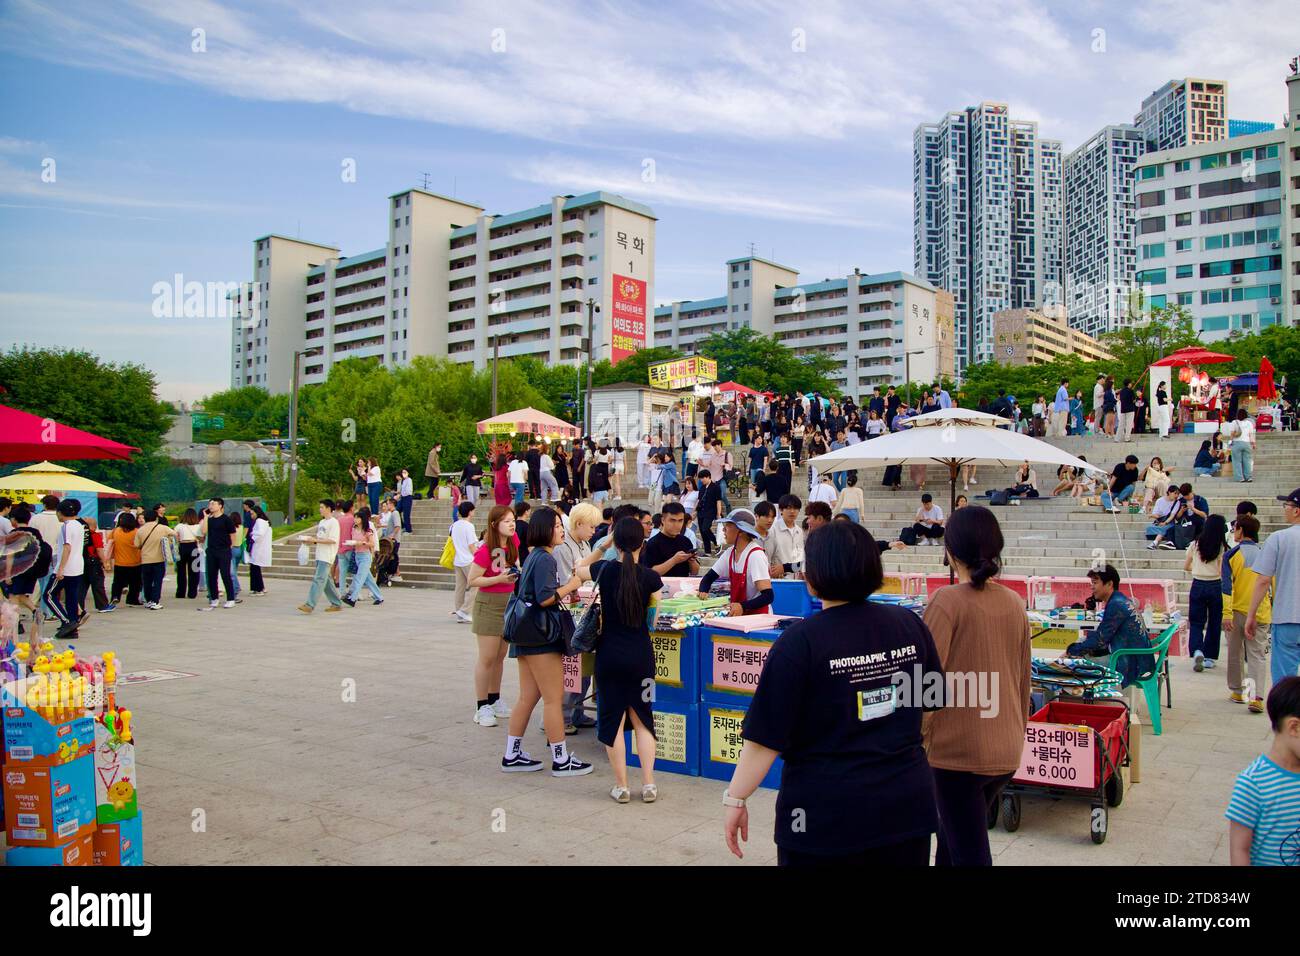 Seoul, South Korea - June 3, 2023: A bustling scene at Yeouido Hangang Park with locals gathering near food carts and concrete stairs, showcasing urba Stock Photo